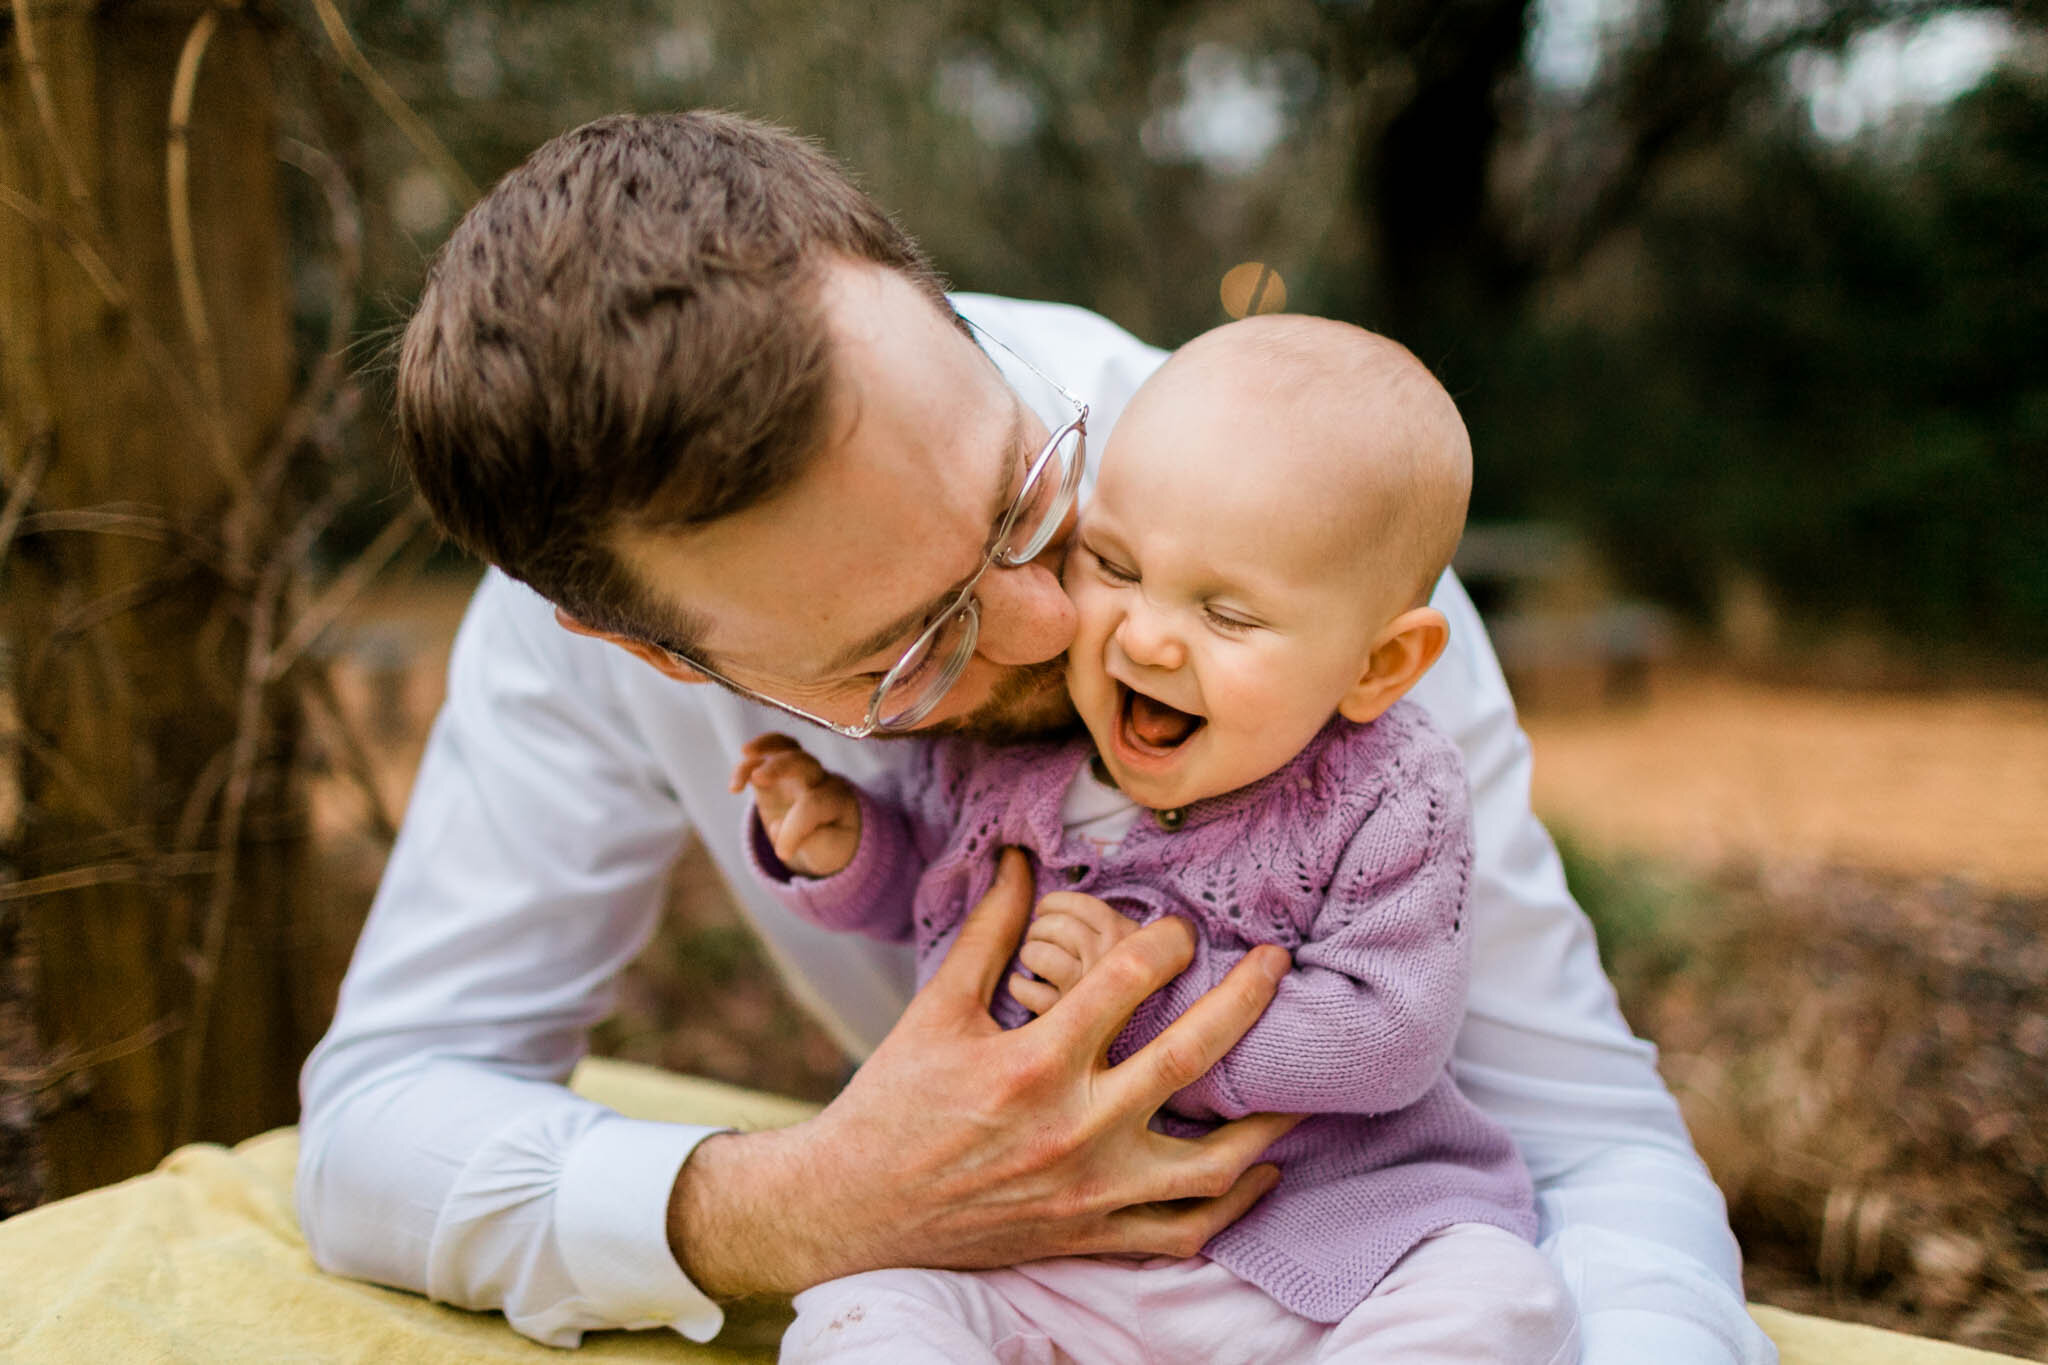 Durham Family Photographer | By G. Lin Photography | Father kissing baby girl on cheeks